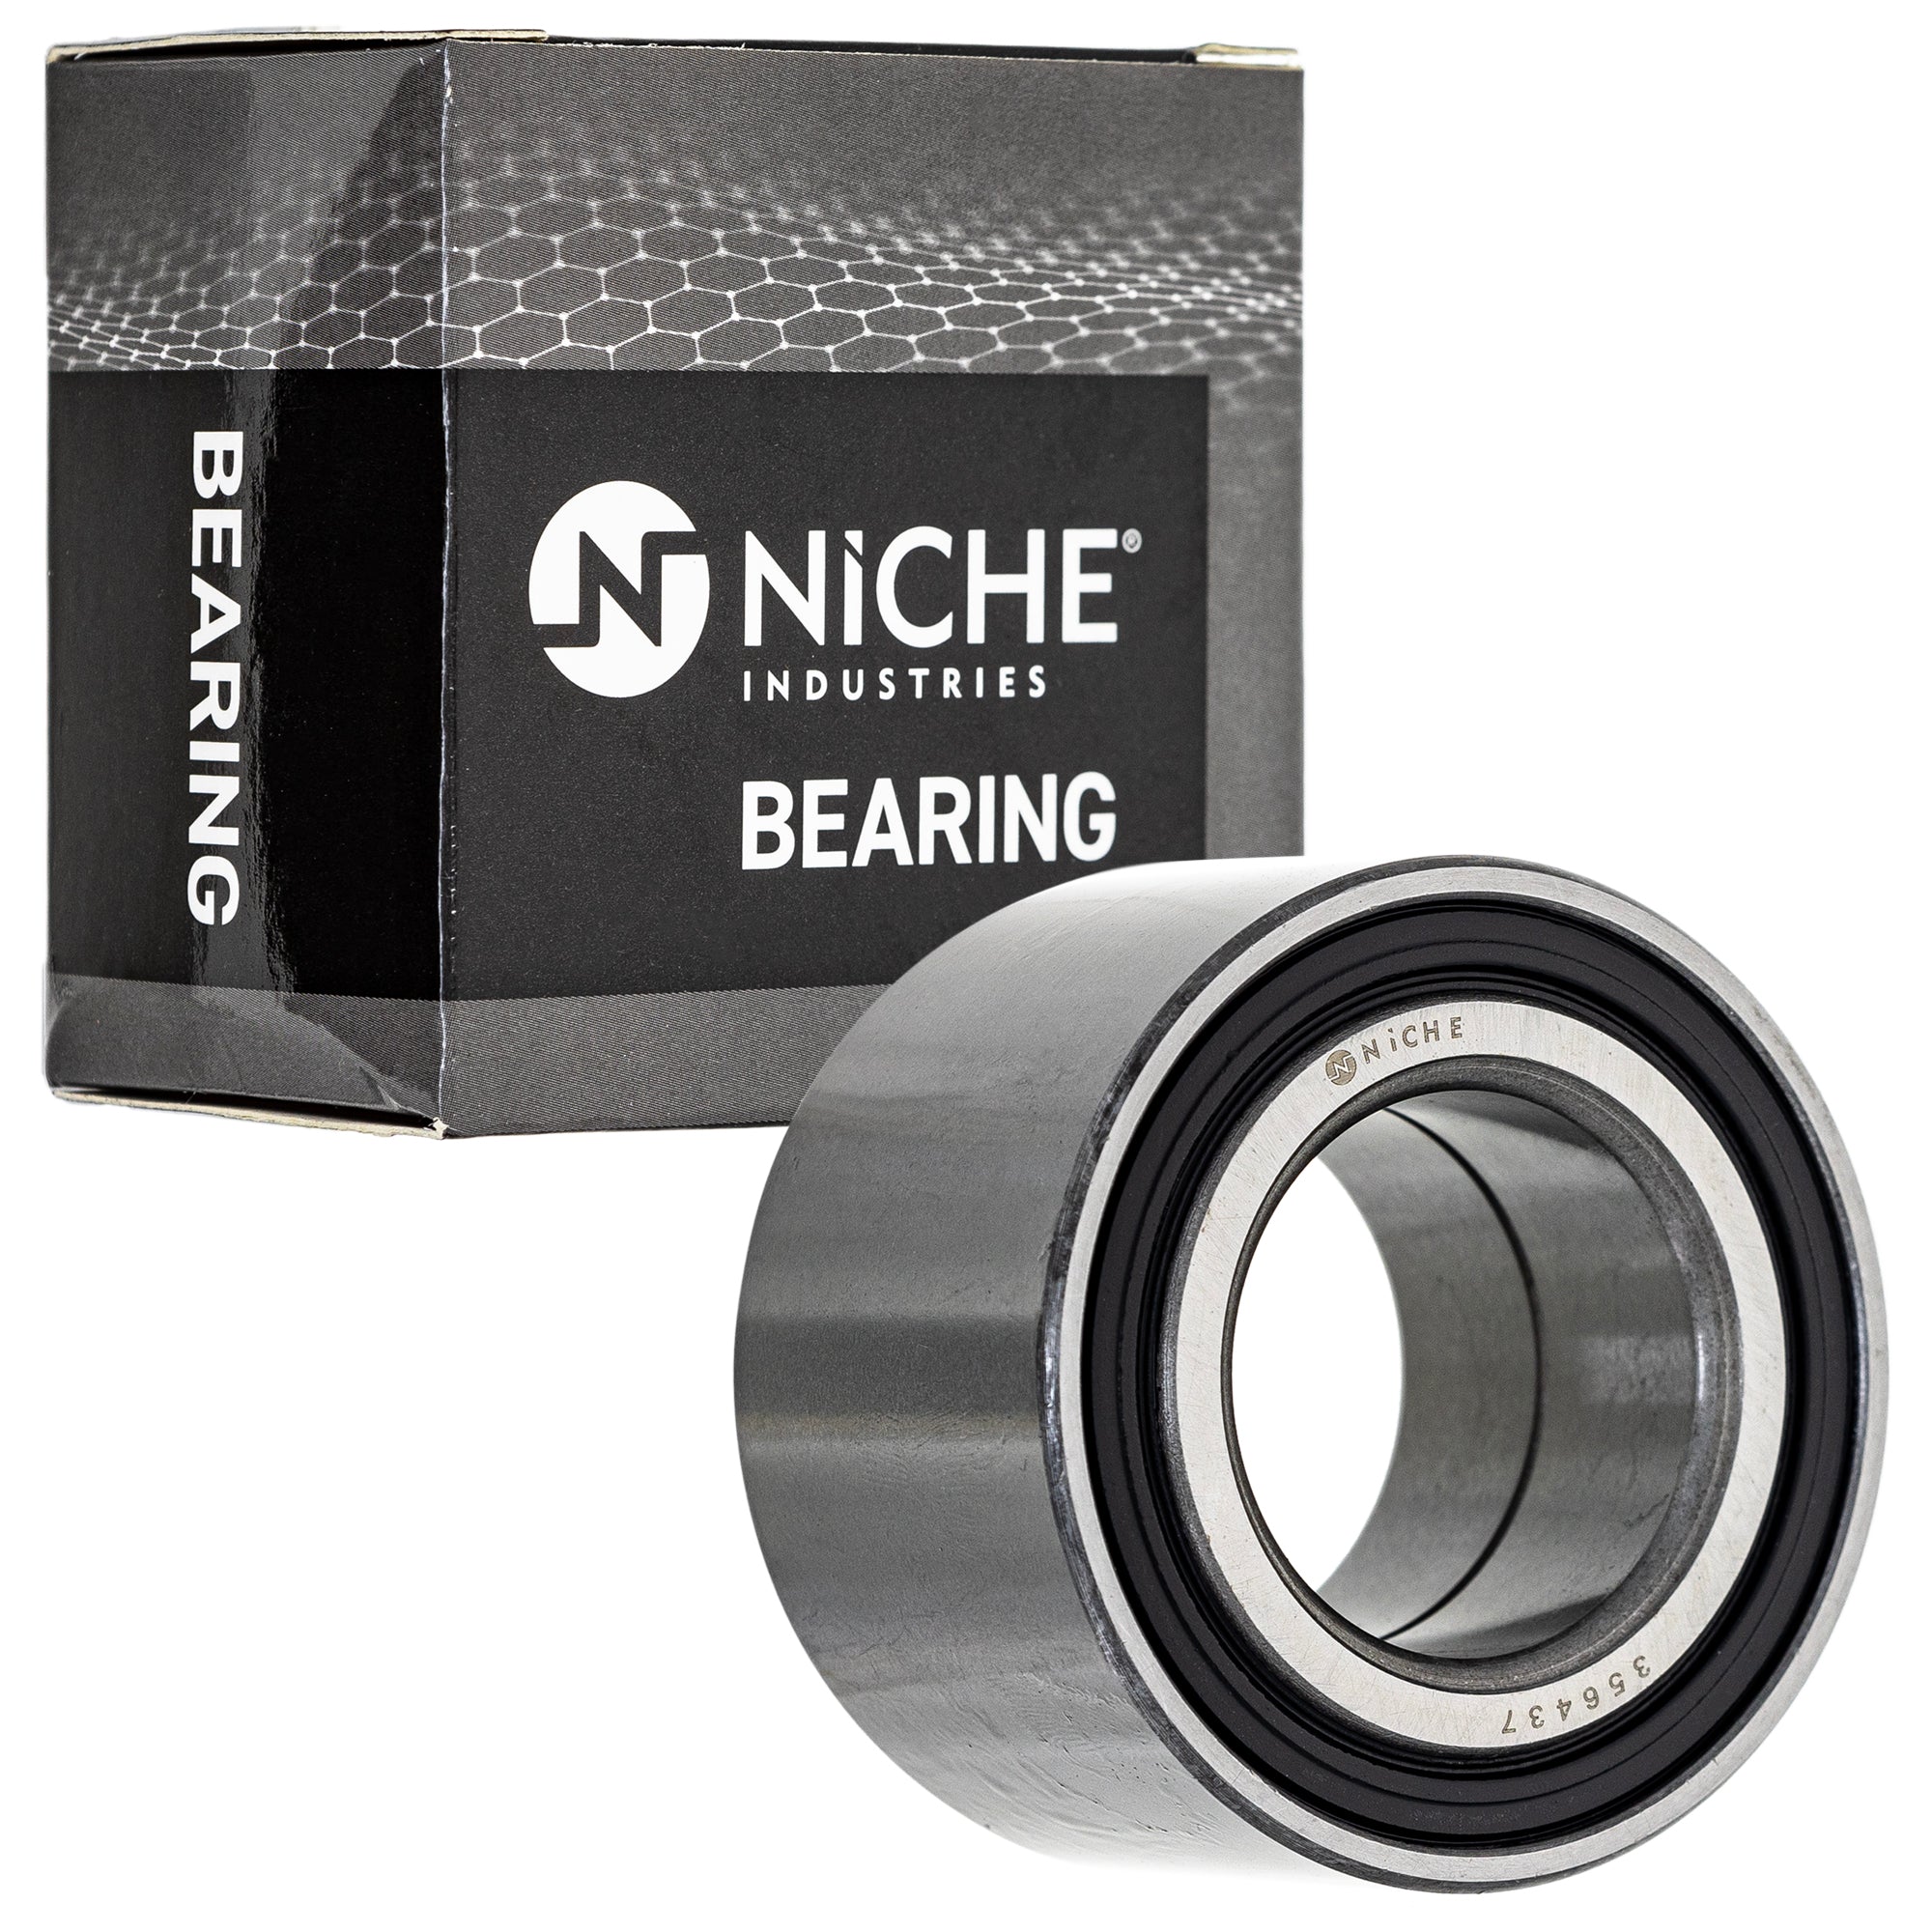 NICHE 519-CBB2283R Bearing for zOTHER GEM Xpedition Trail Sportsman